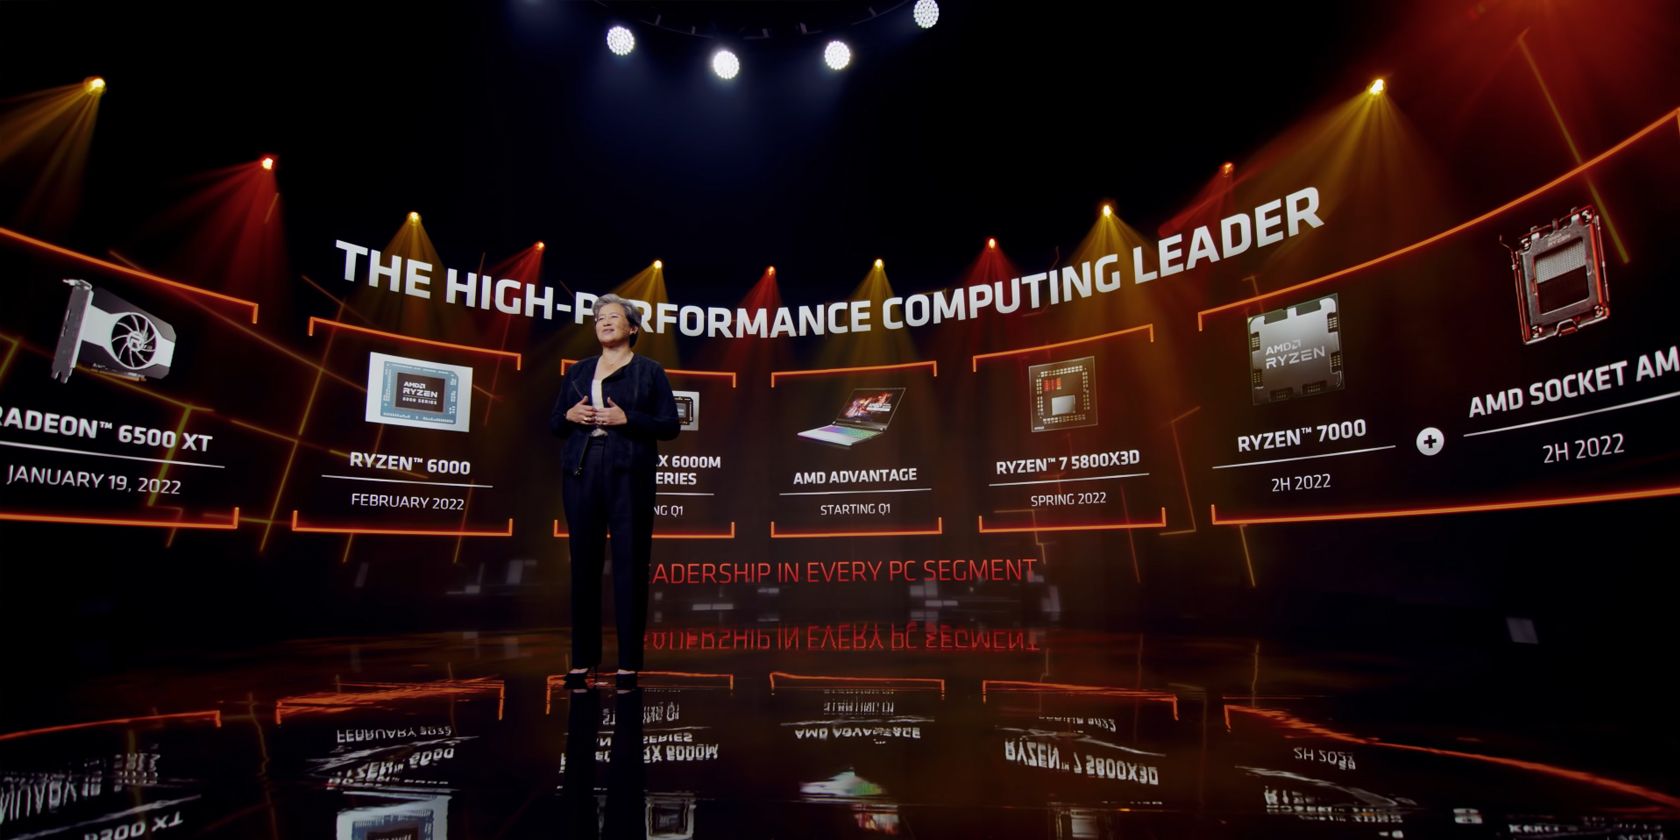 Dr Lisa Su presenting AMD's product line up for 2022